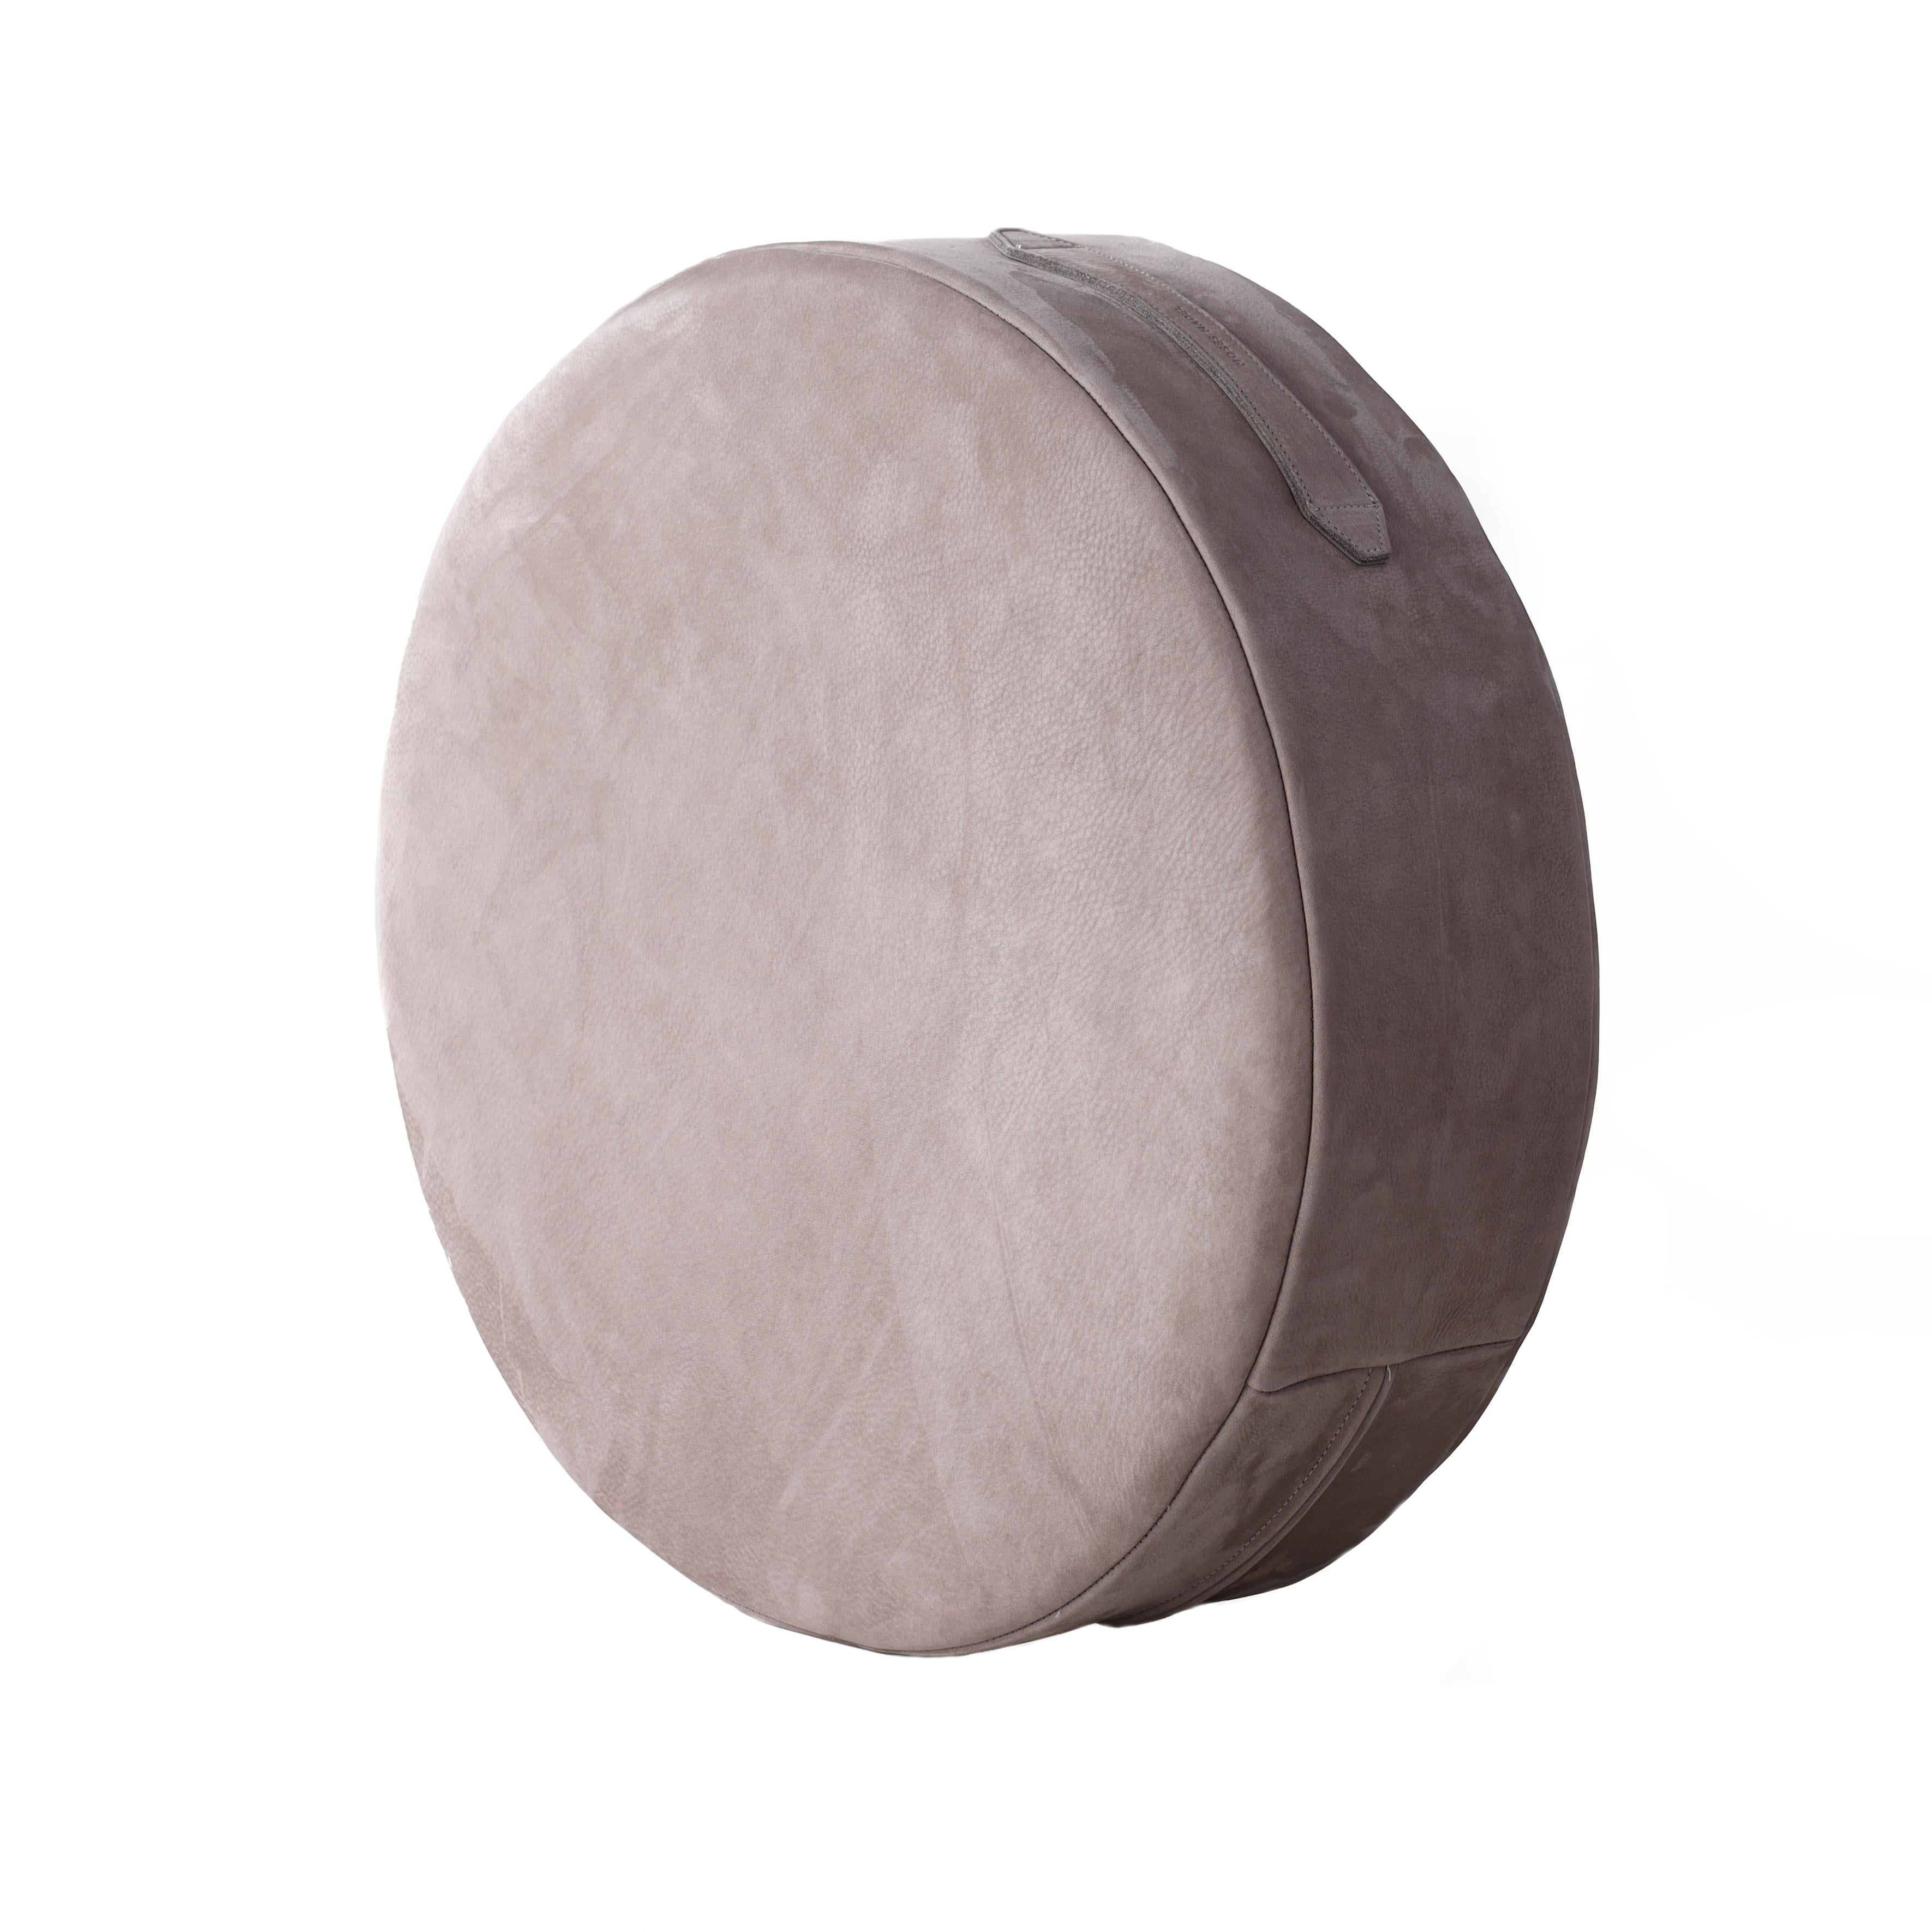 Designed to exude luxury and wake up your space with additional seating, accent decor and cozy chill zones, these low-profile circular shearling floor cushions can be easily moved or stashed away. The Puck Cushion in velvety Nubuck Leather is filled